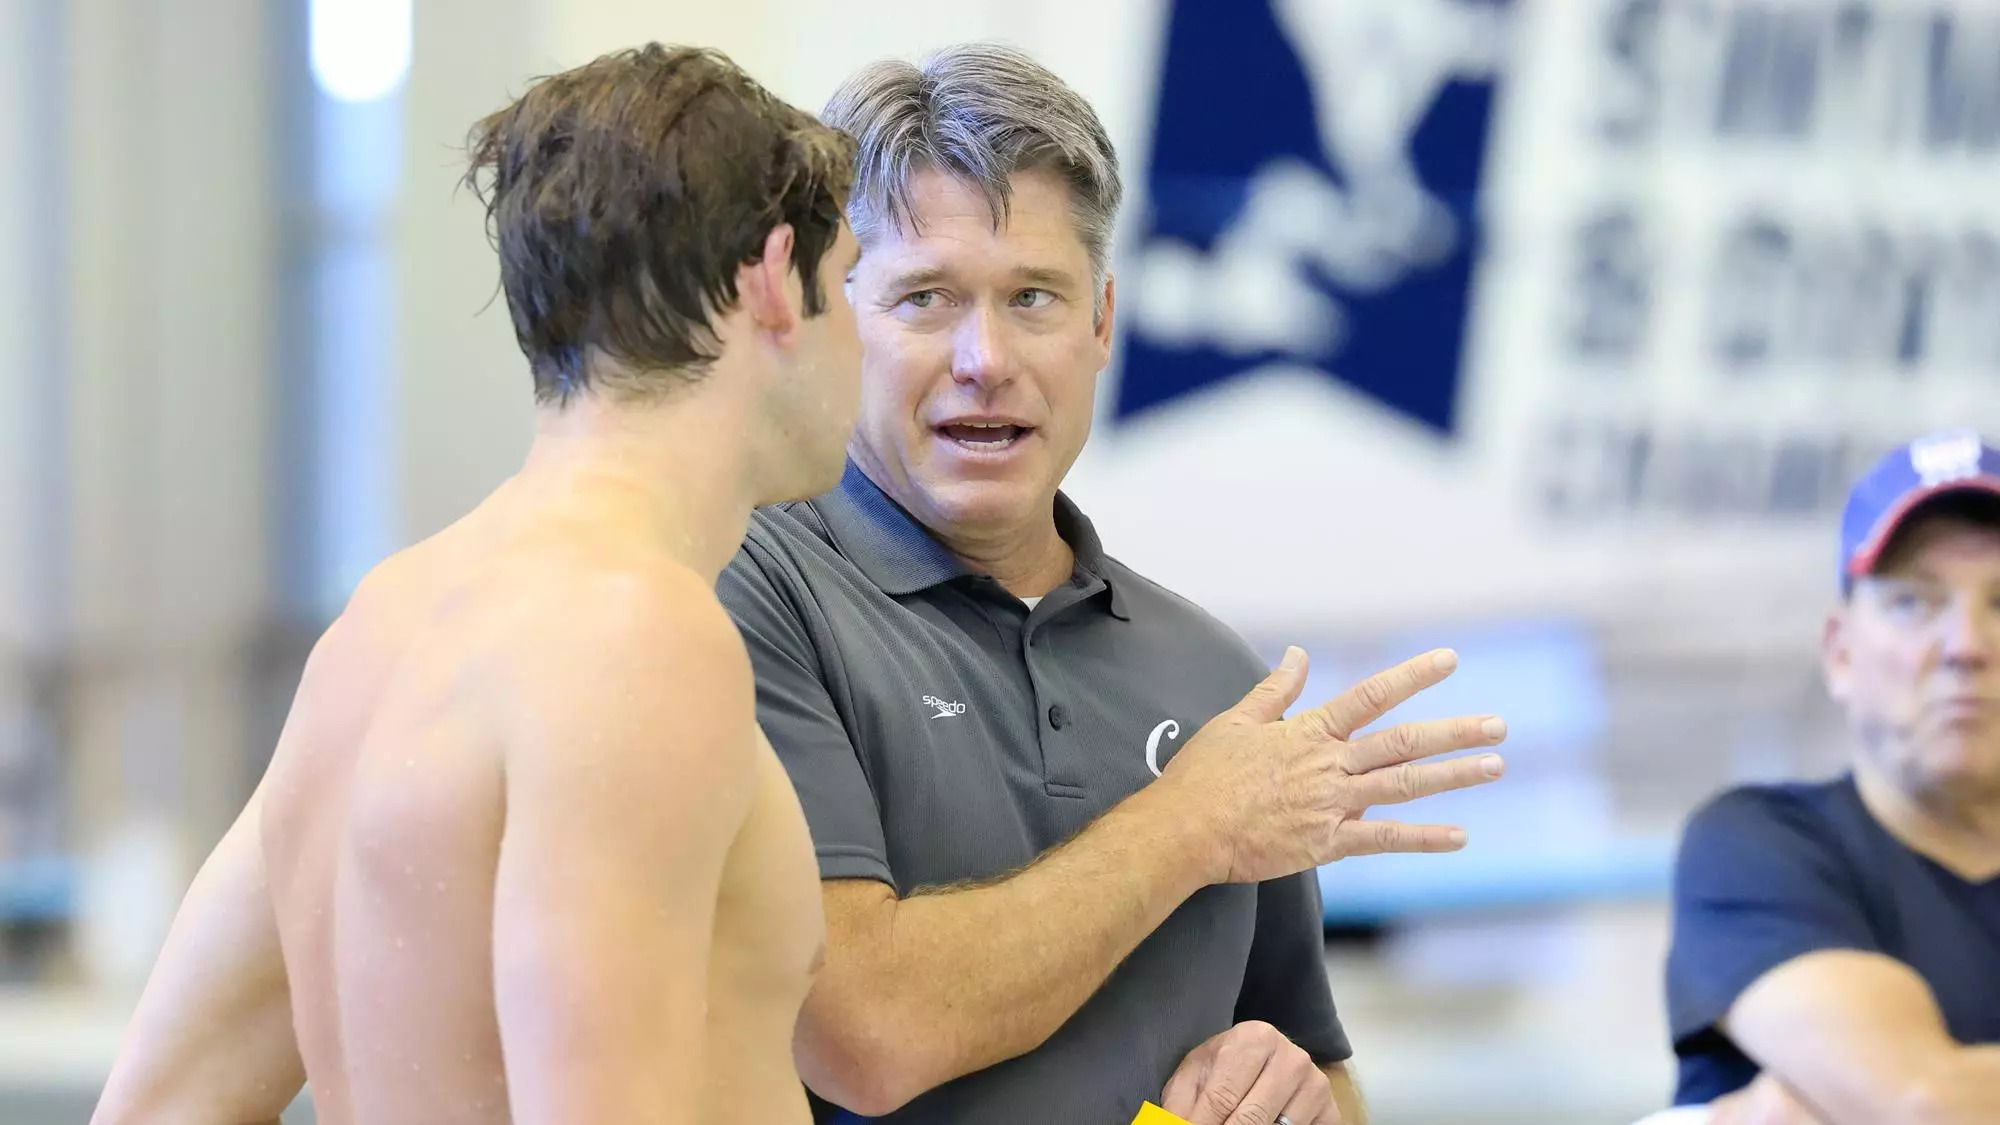 A young male swimmer, left, listens to a man with gray hair, gesturing -- Dave Durden with Ryan Murphy